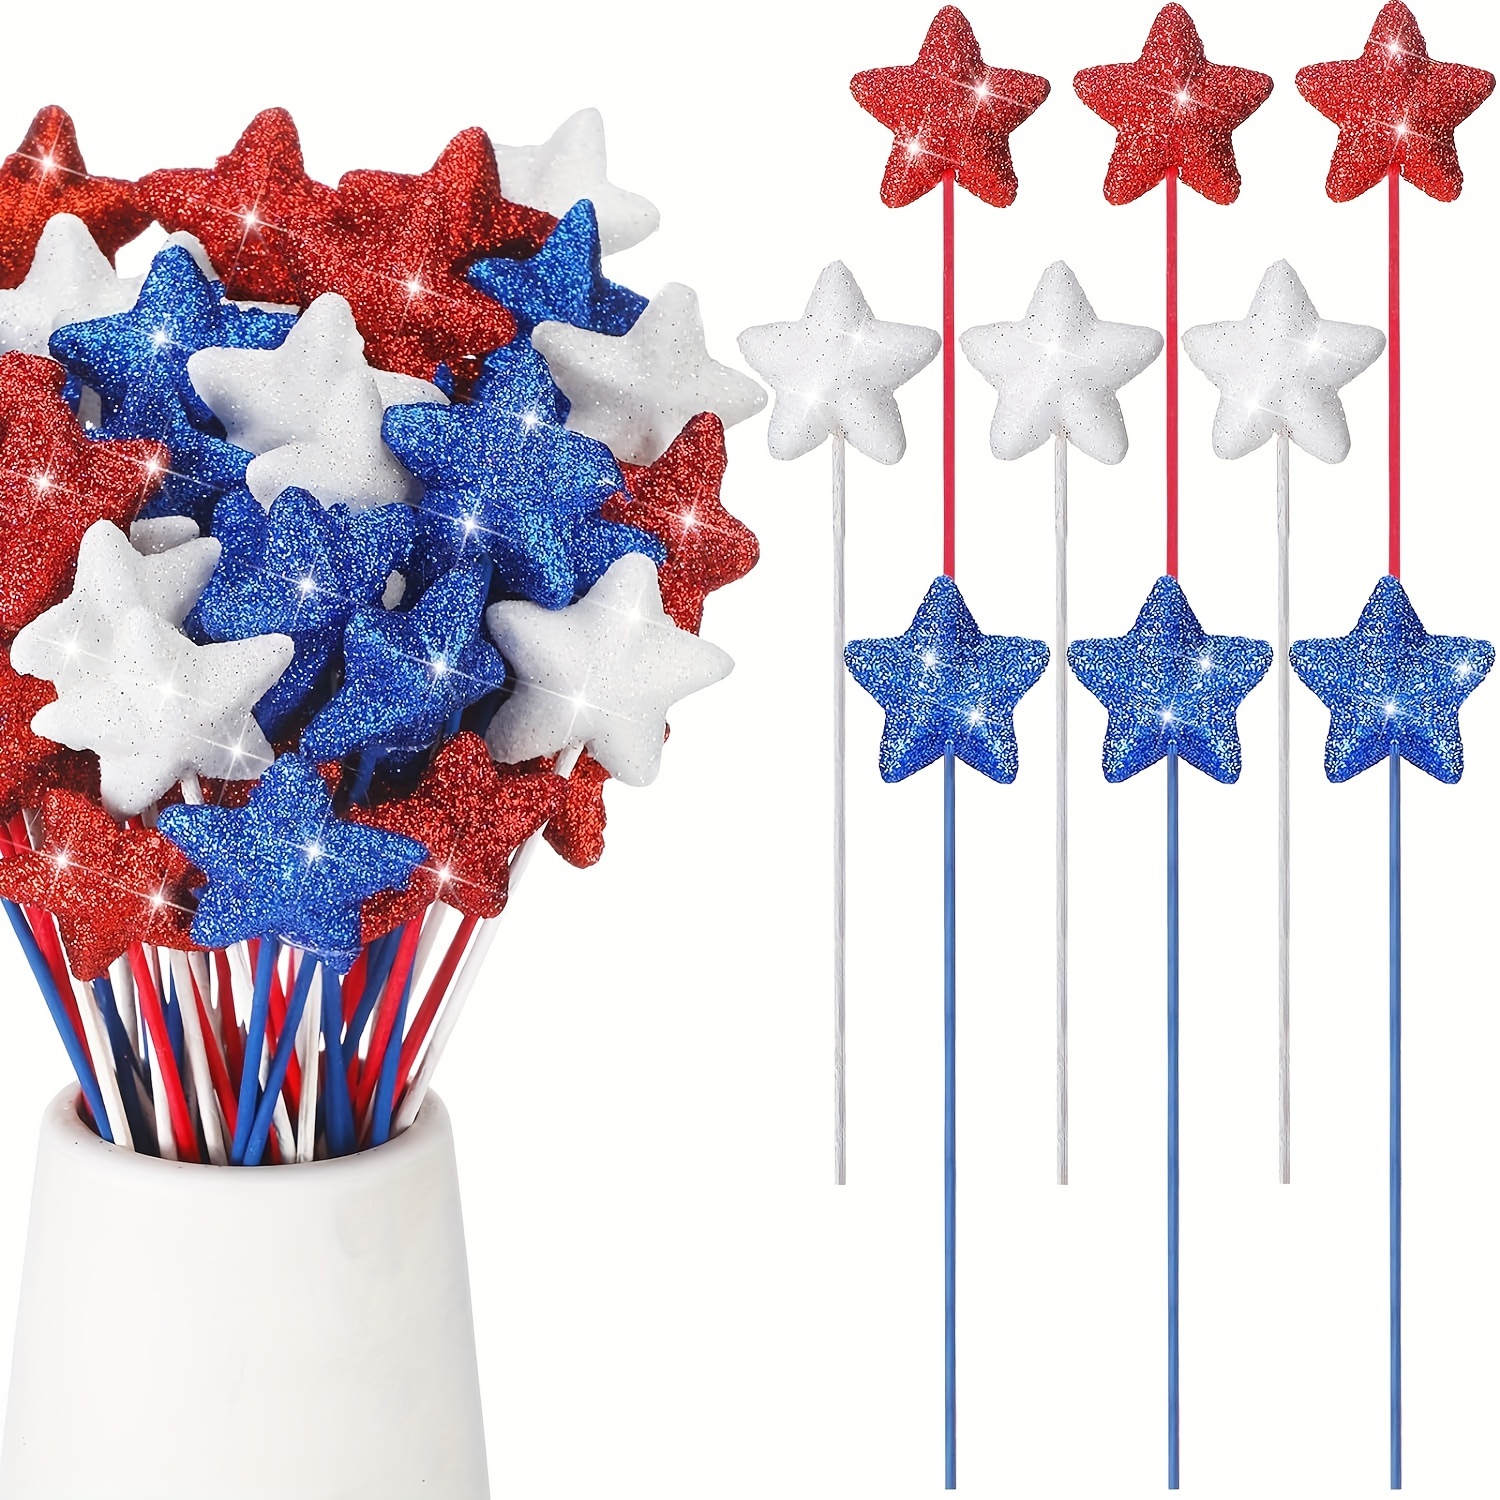 

18pcs 4th Of July Puffy Glitter Star Picks 7.9'' Americana Foam Star Stems Red White Blue Patriotic Decor For Memorial Day National Day Independence Day Party Table Centerpieces Decoration